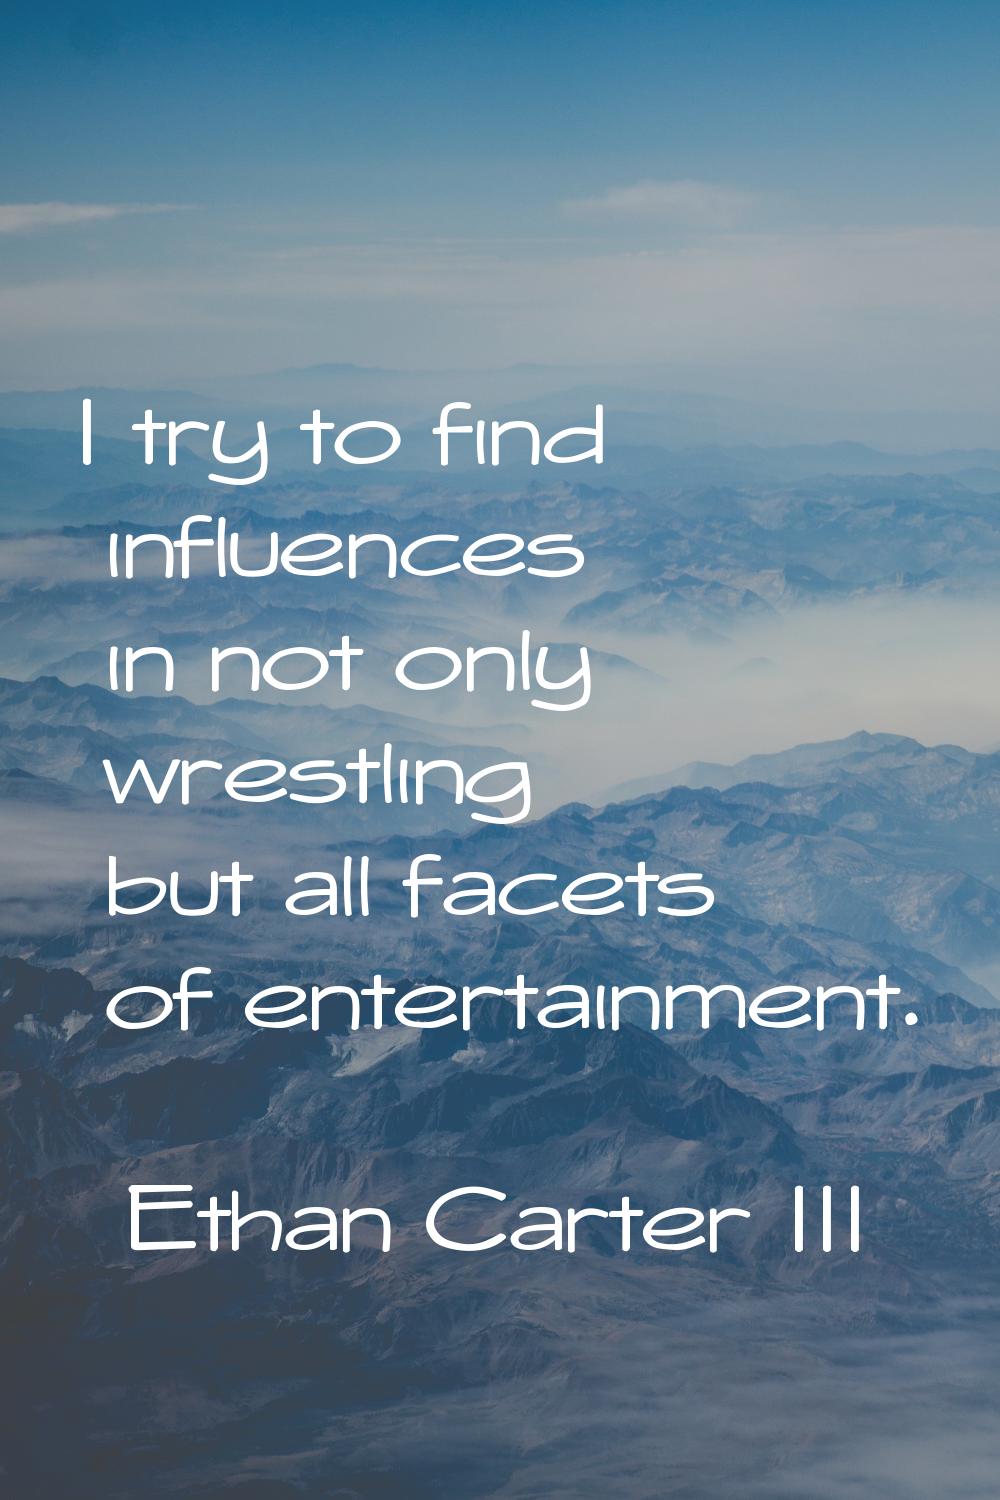 I try to find influences in not only wrestling but all facets of entertainment.